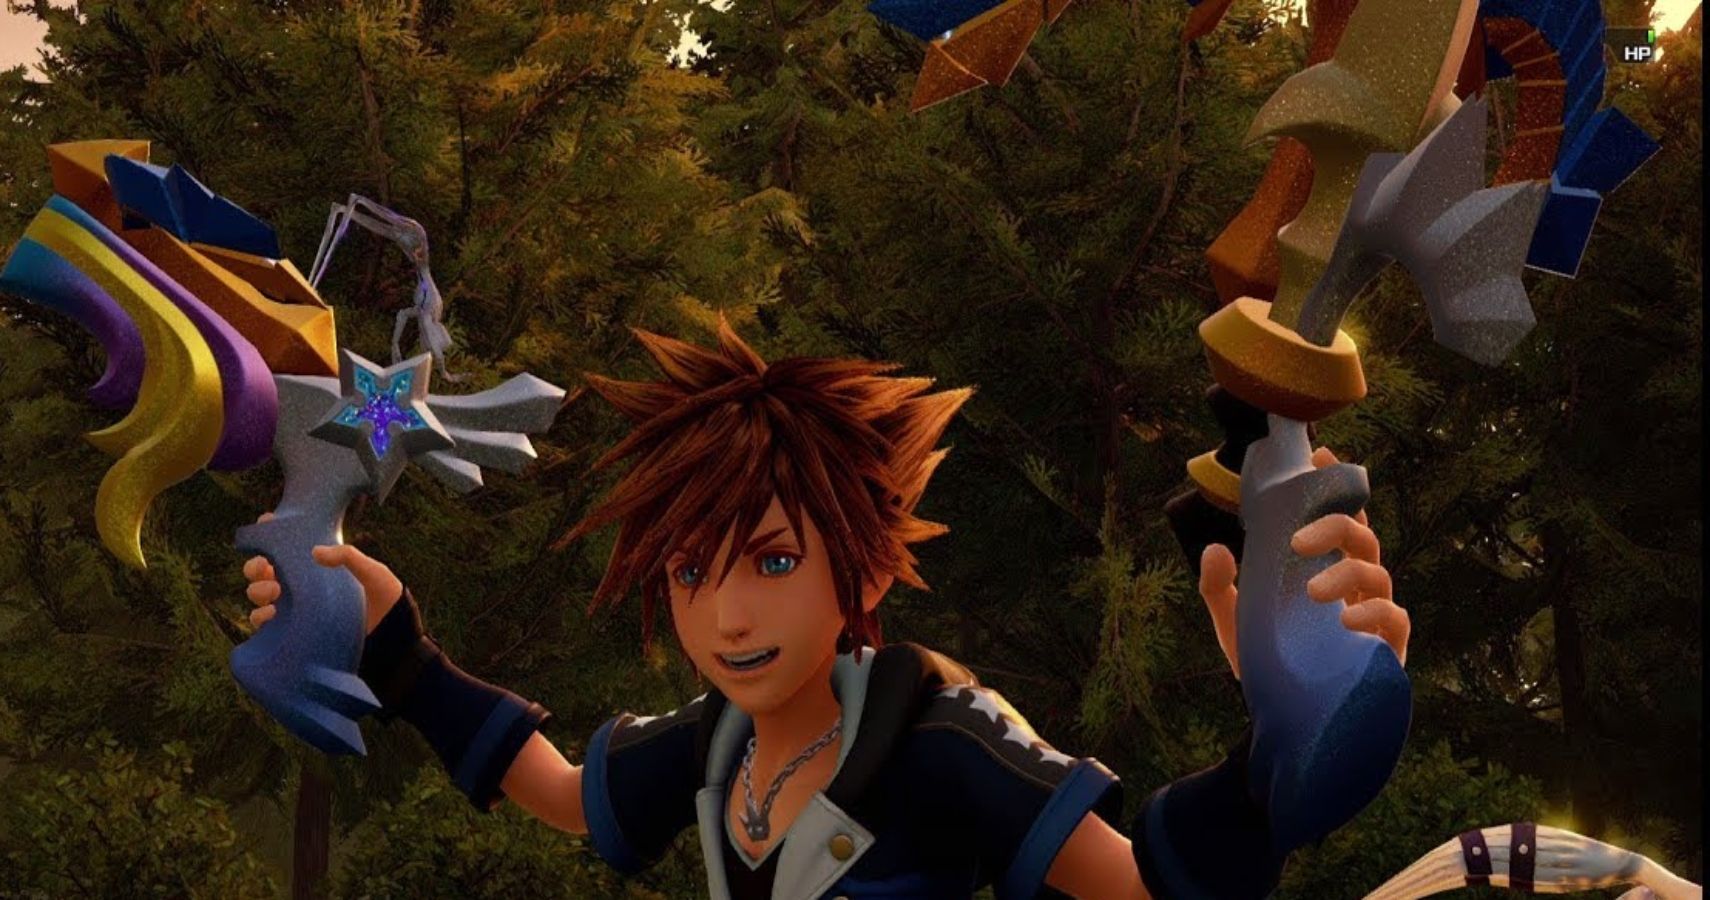 Critical Mode Is Coming To Kingdom Hearts 3 Soon Says CoDirector